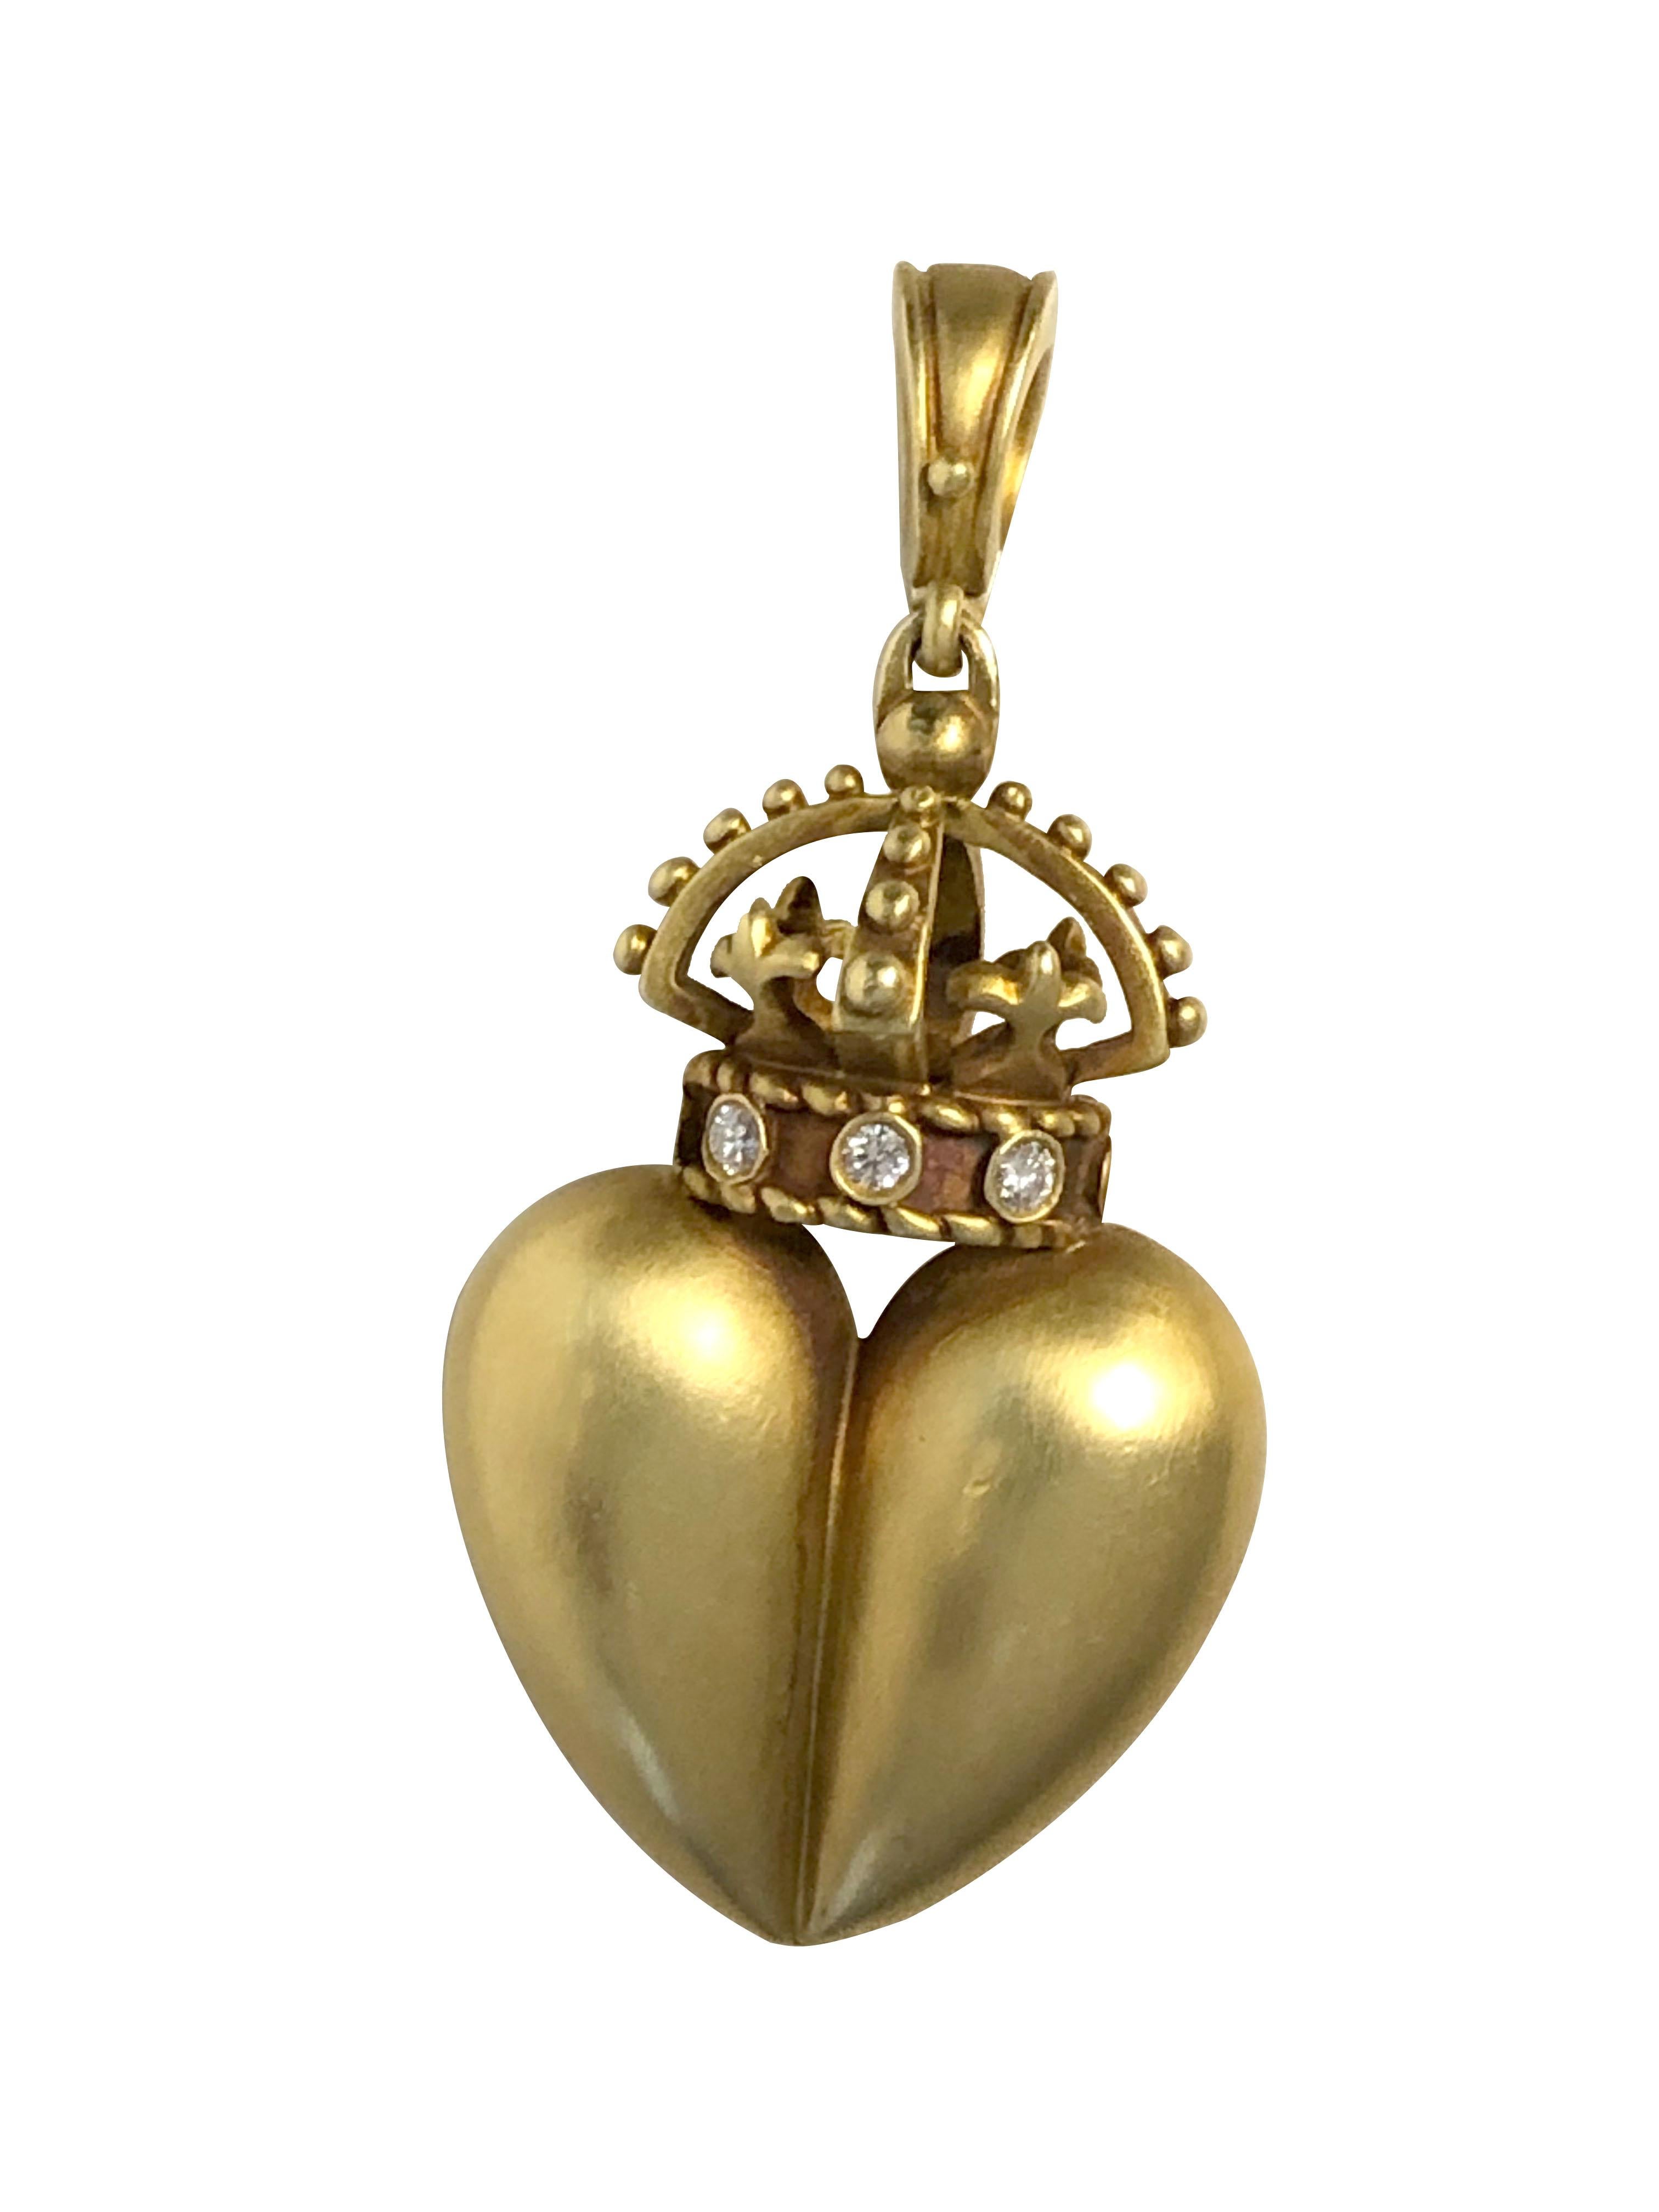 Circa 1990 Barry Kieselstein Cord Crowned Heart Pendant, measuring 2 inches in length X 1 inch wide and 5/8 inch wide. Very well detailed with a frosted / brushed finish and set with 8 Round Brilliant cut Diamonds totaling .40 Carat, weighing 28